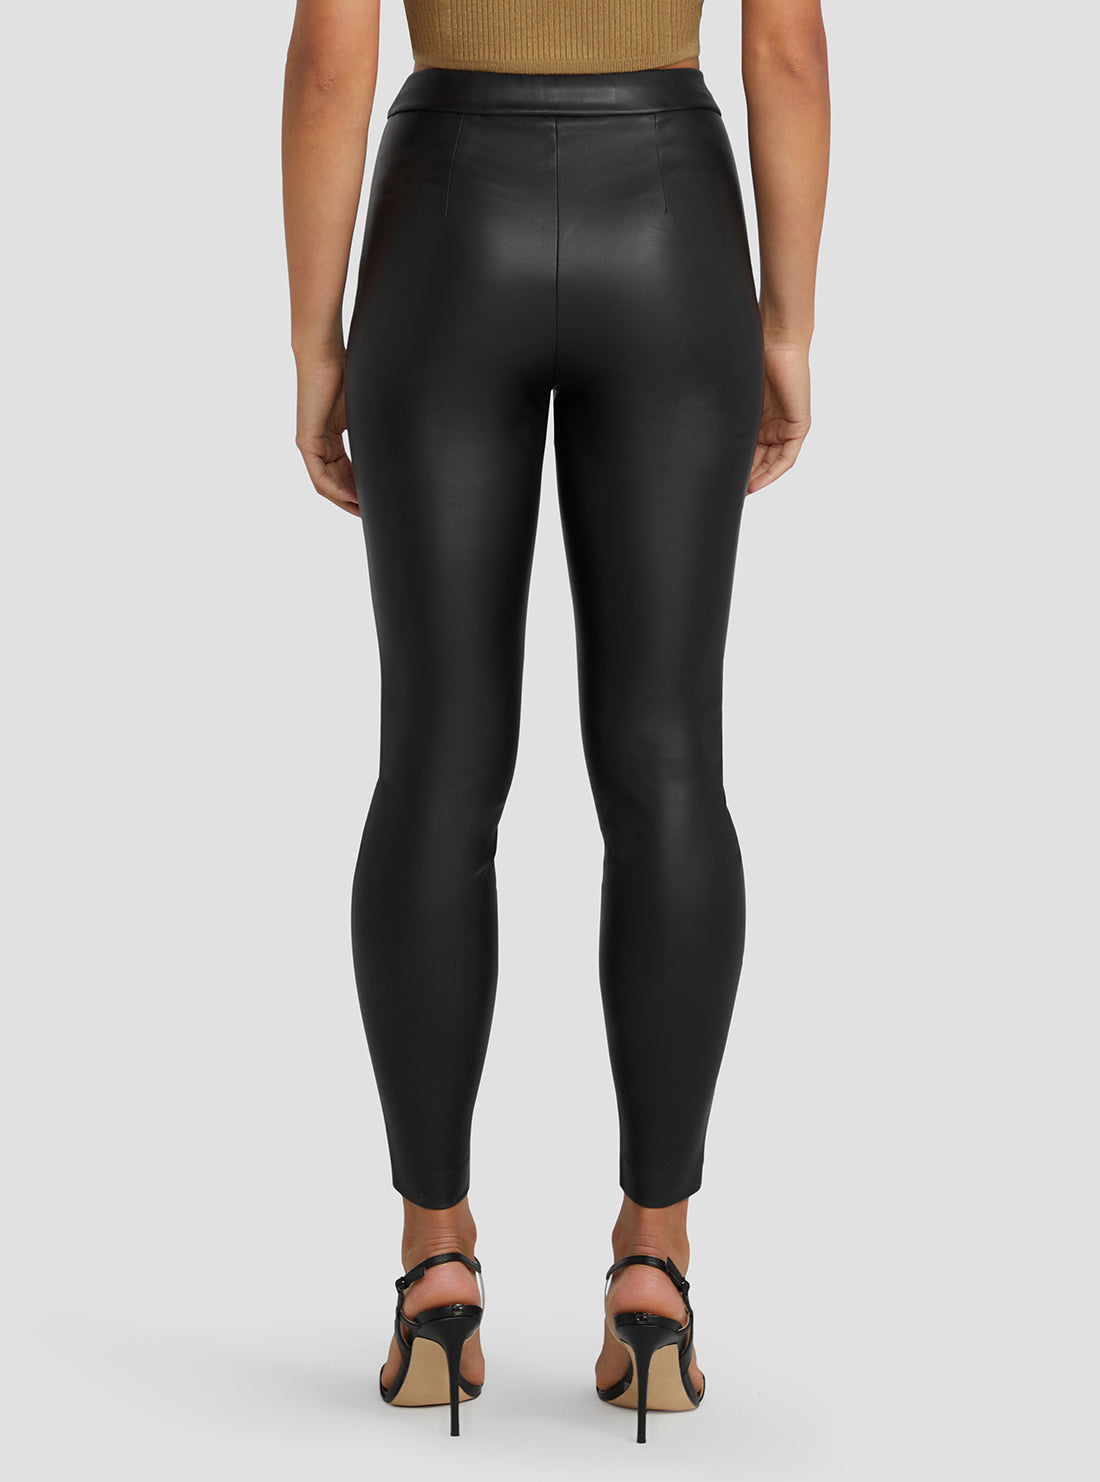 Marciano Black Faux Leather Hype Pants